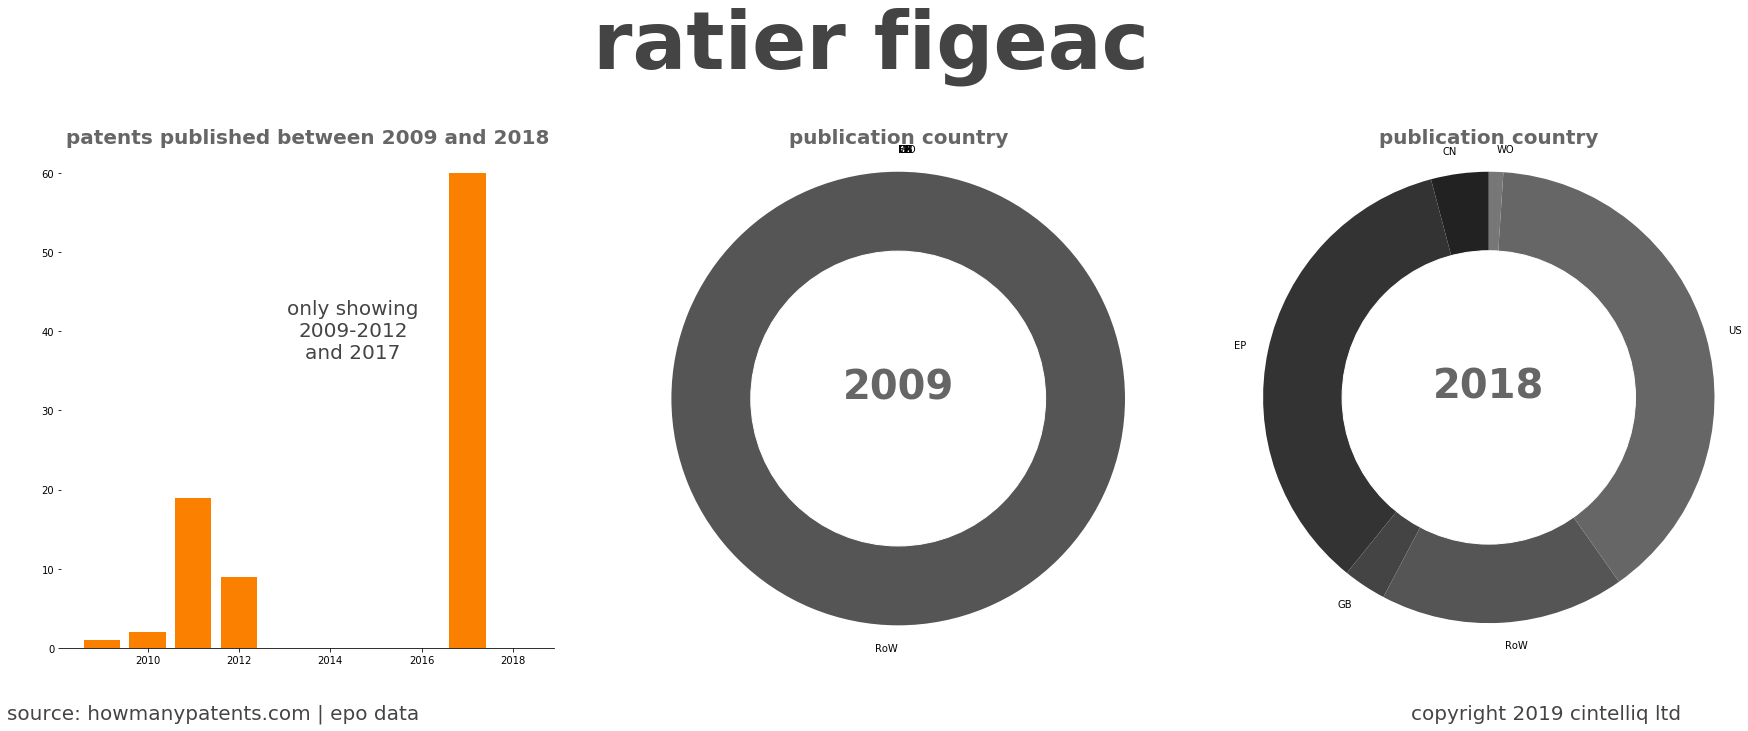 summary of patents for Ratier Figeac